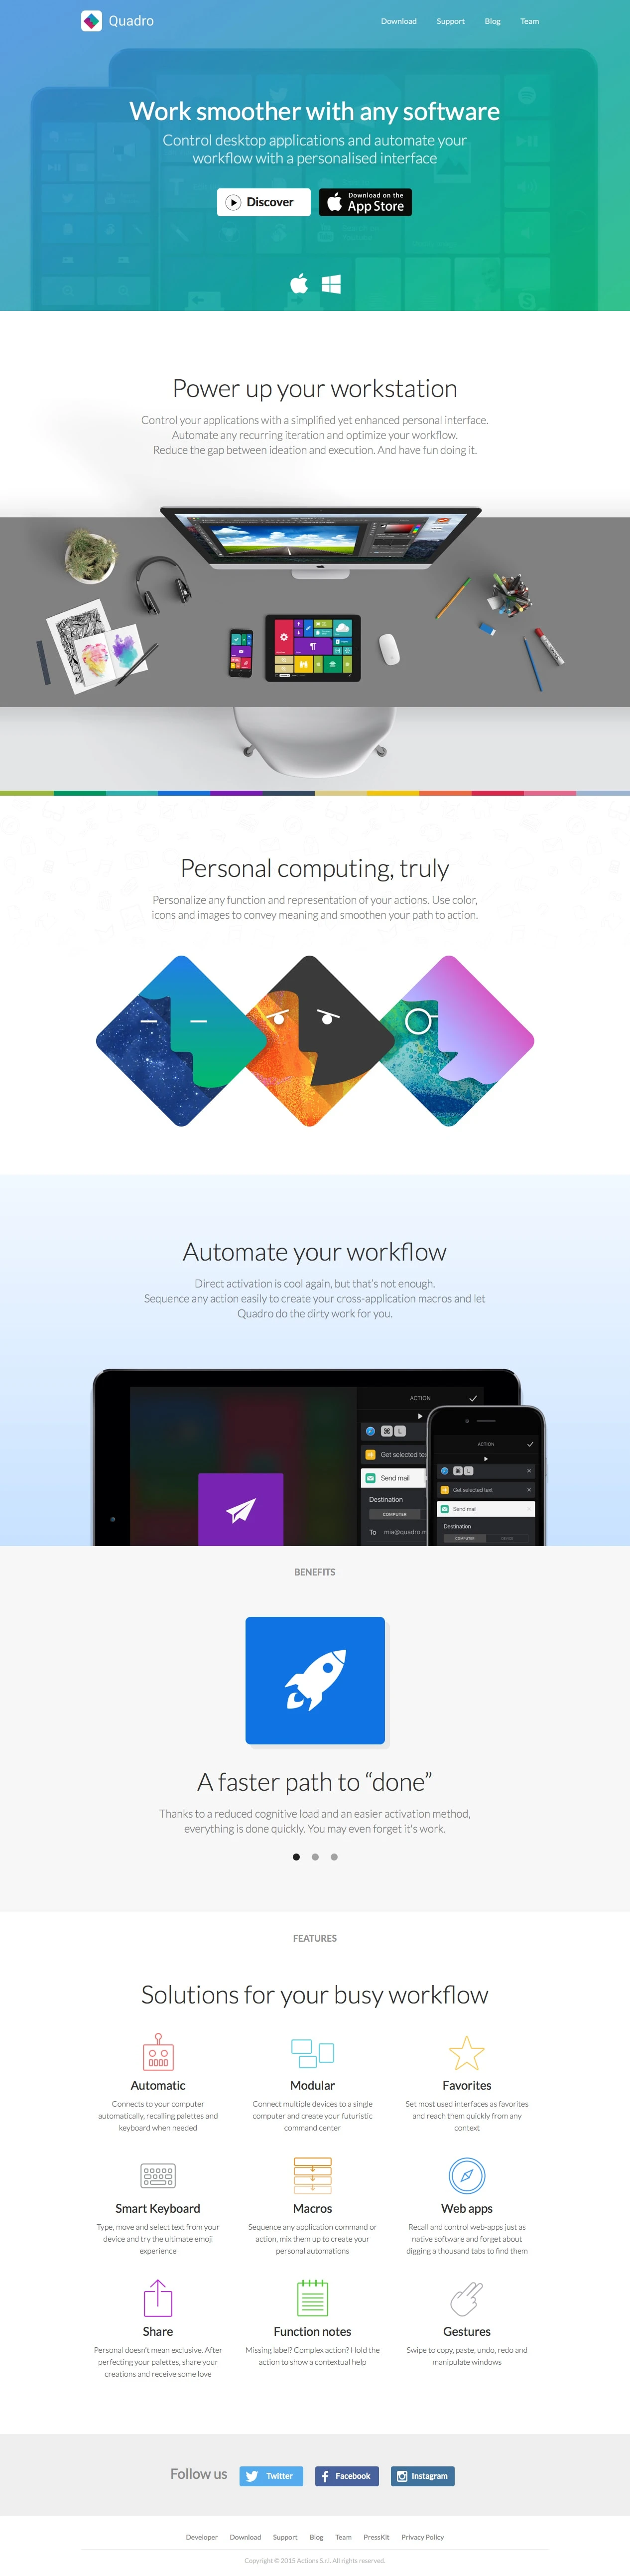 Quadro Landing Page Example: Control desktop applications and automate your workflow with a personalised interface